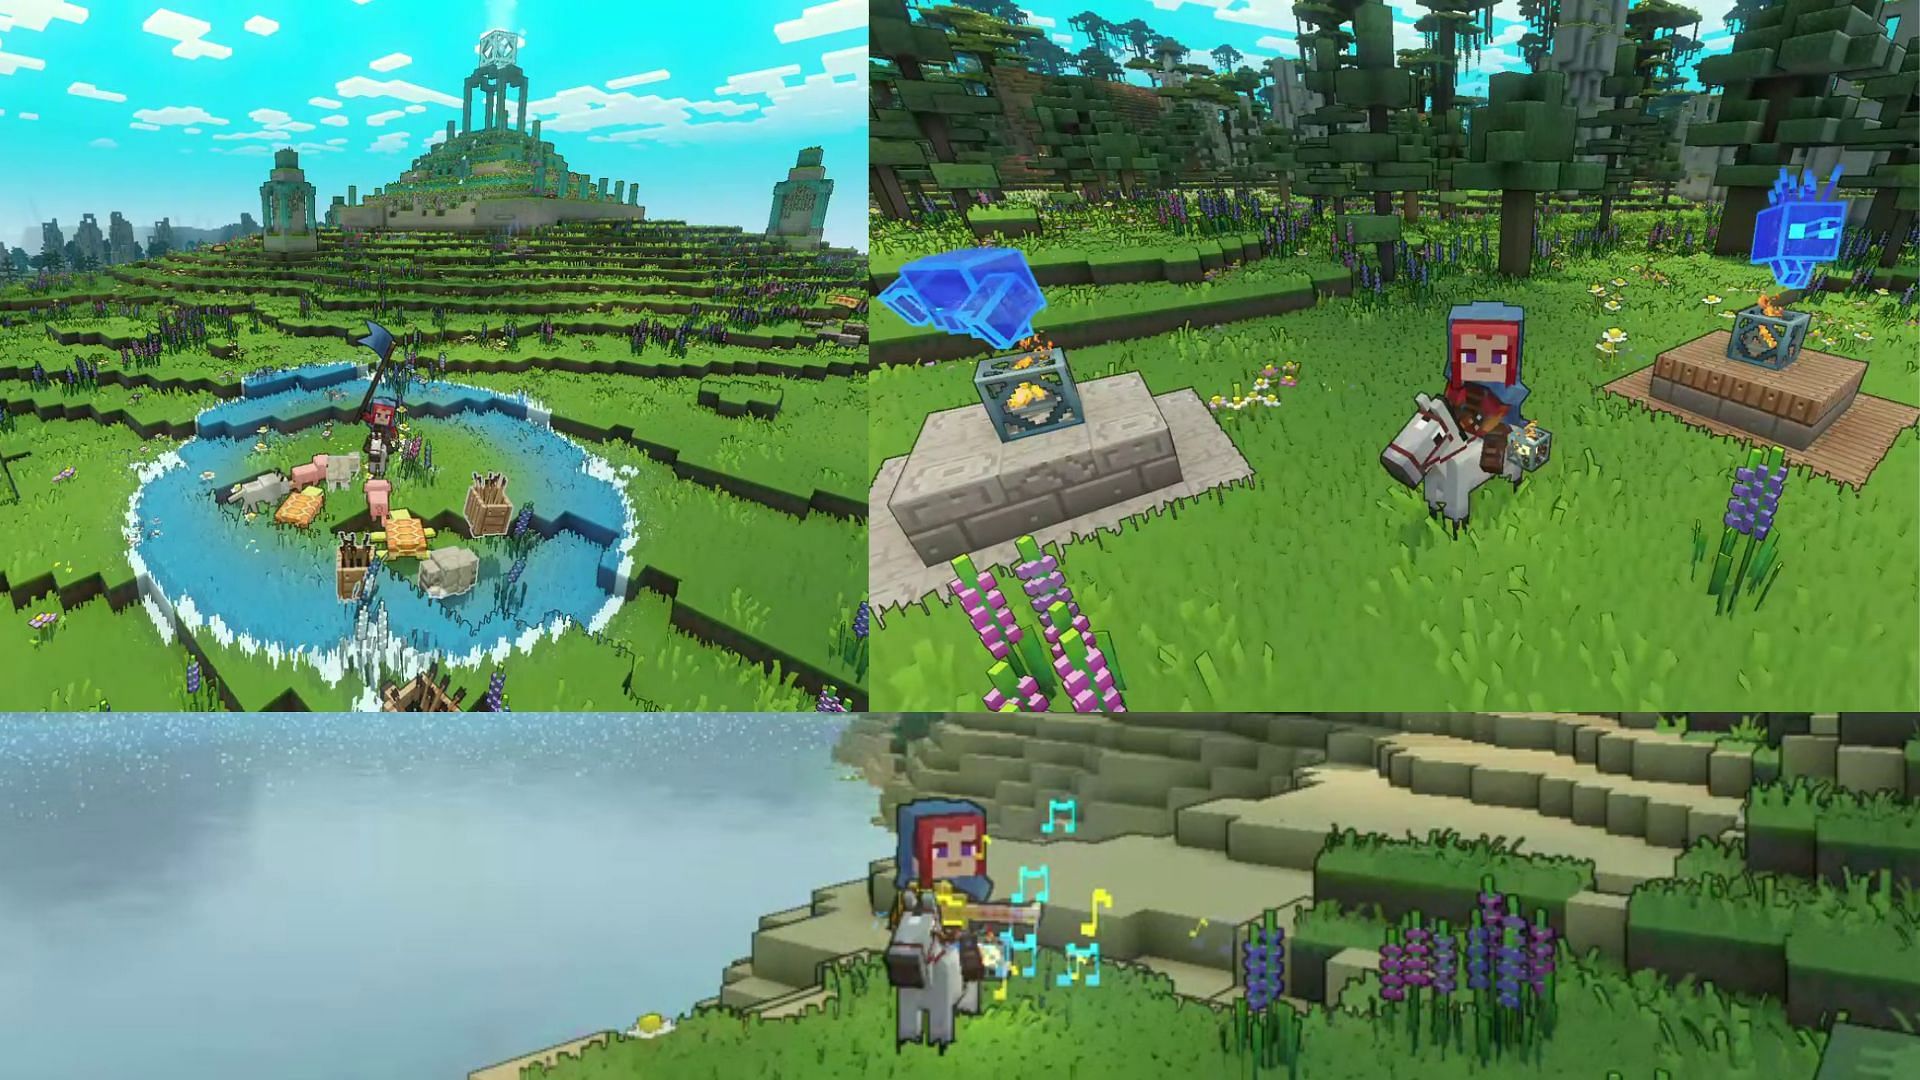 Minecraft Legends Gameplay Revealed with New Mobs, Weapons, and More